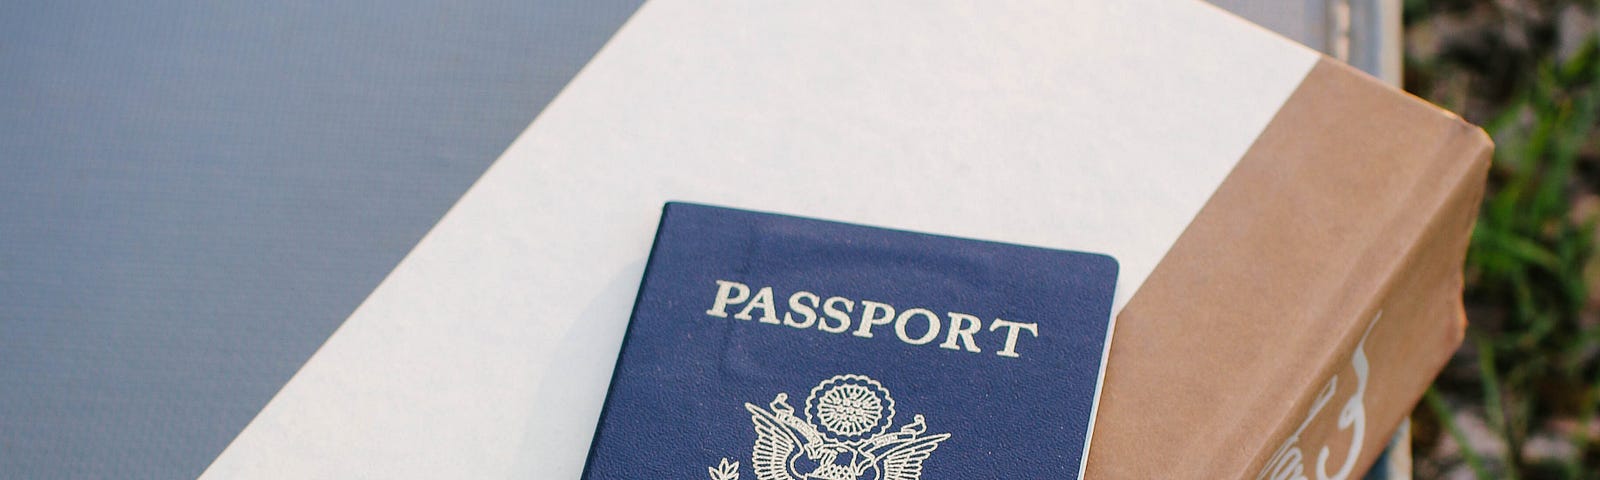 A blue passport laying on top of a white book, laying on top of a light blue suitcase, laying on top of grass.